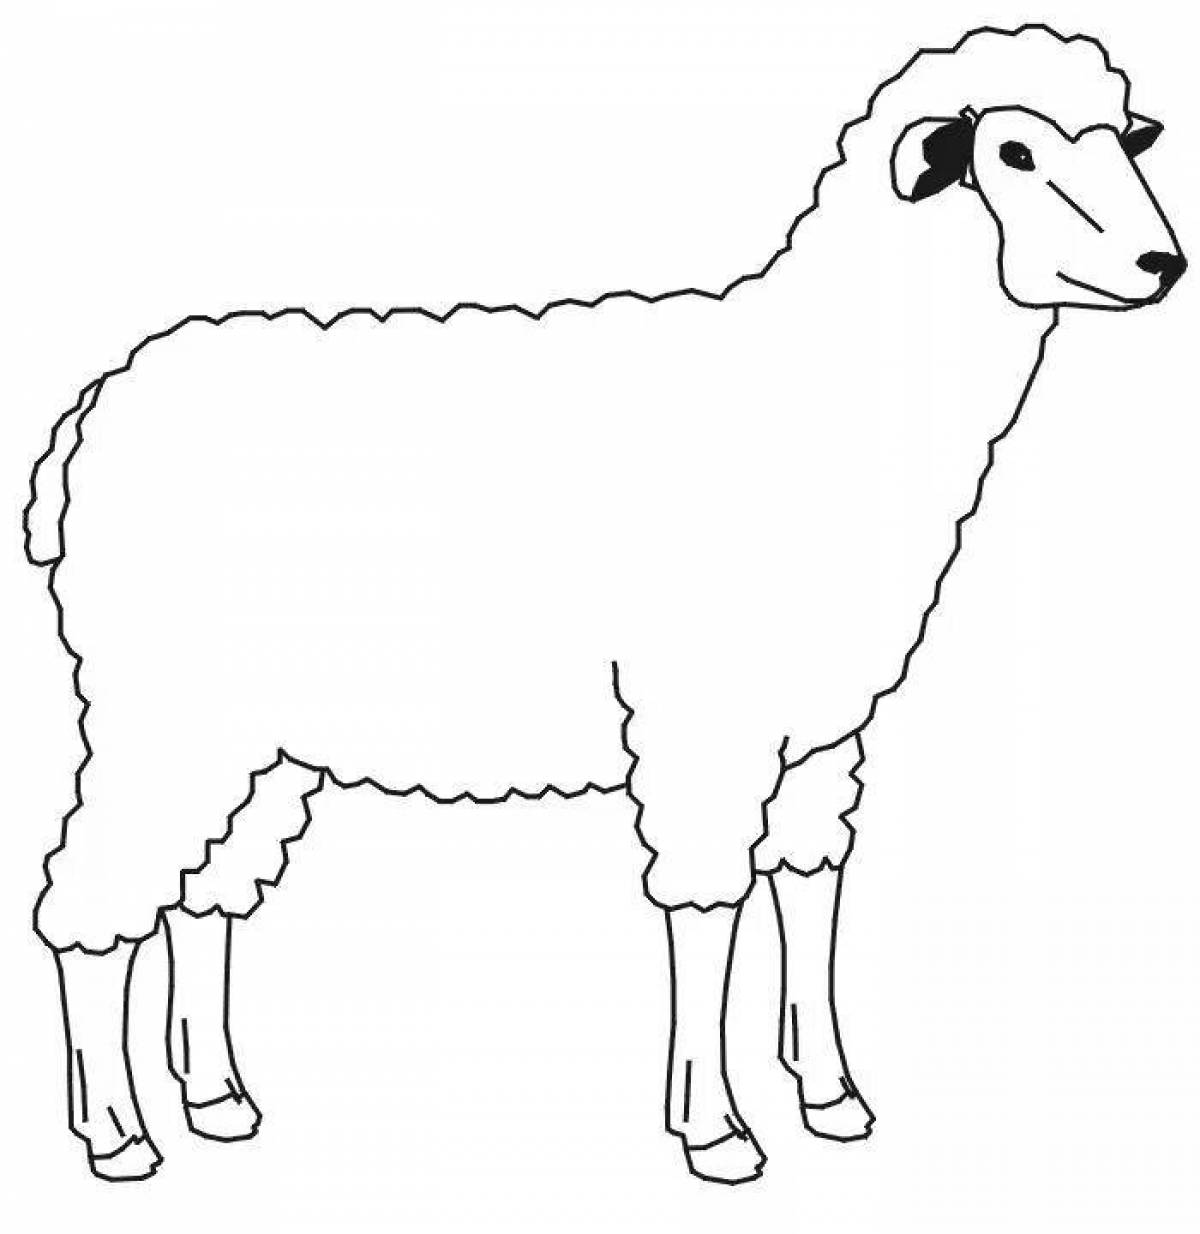 Farm Animal Coloring Pages for Kids | kids world